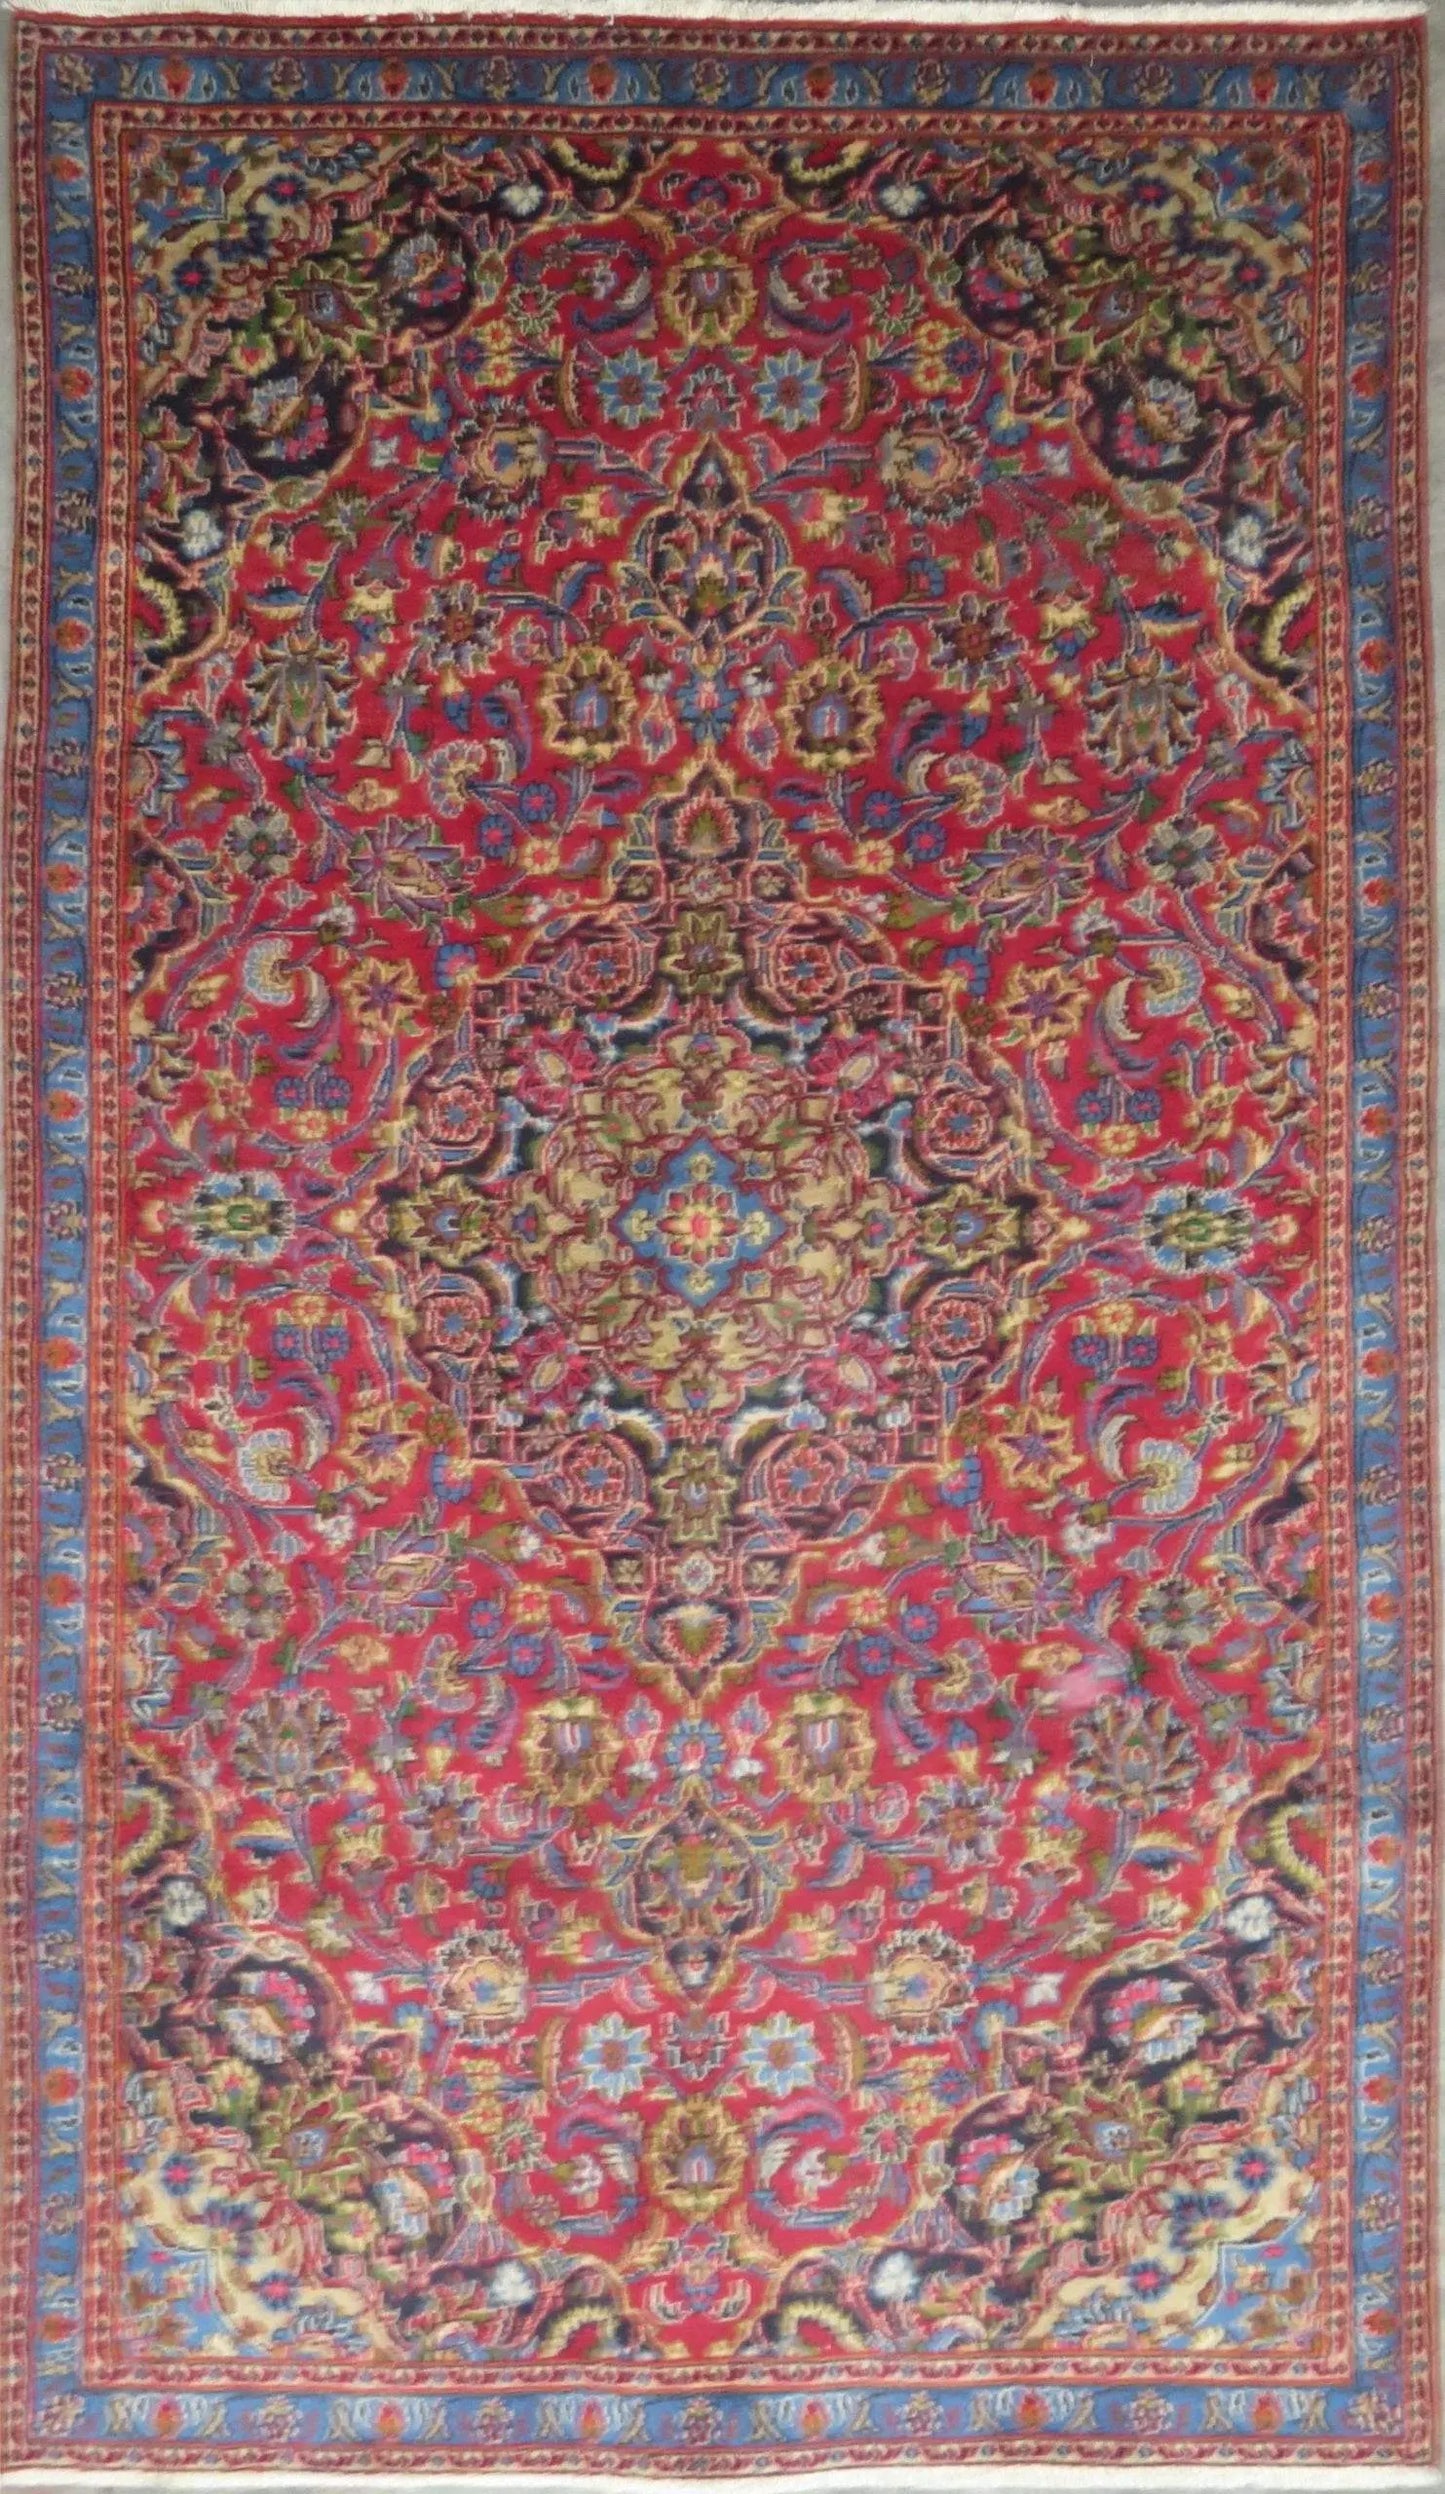 Hand-Knotted Persian Wool Rug _ Luxurious Vintage Design, 7'7" x 4'5", Artisan Crafted